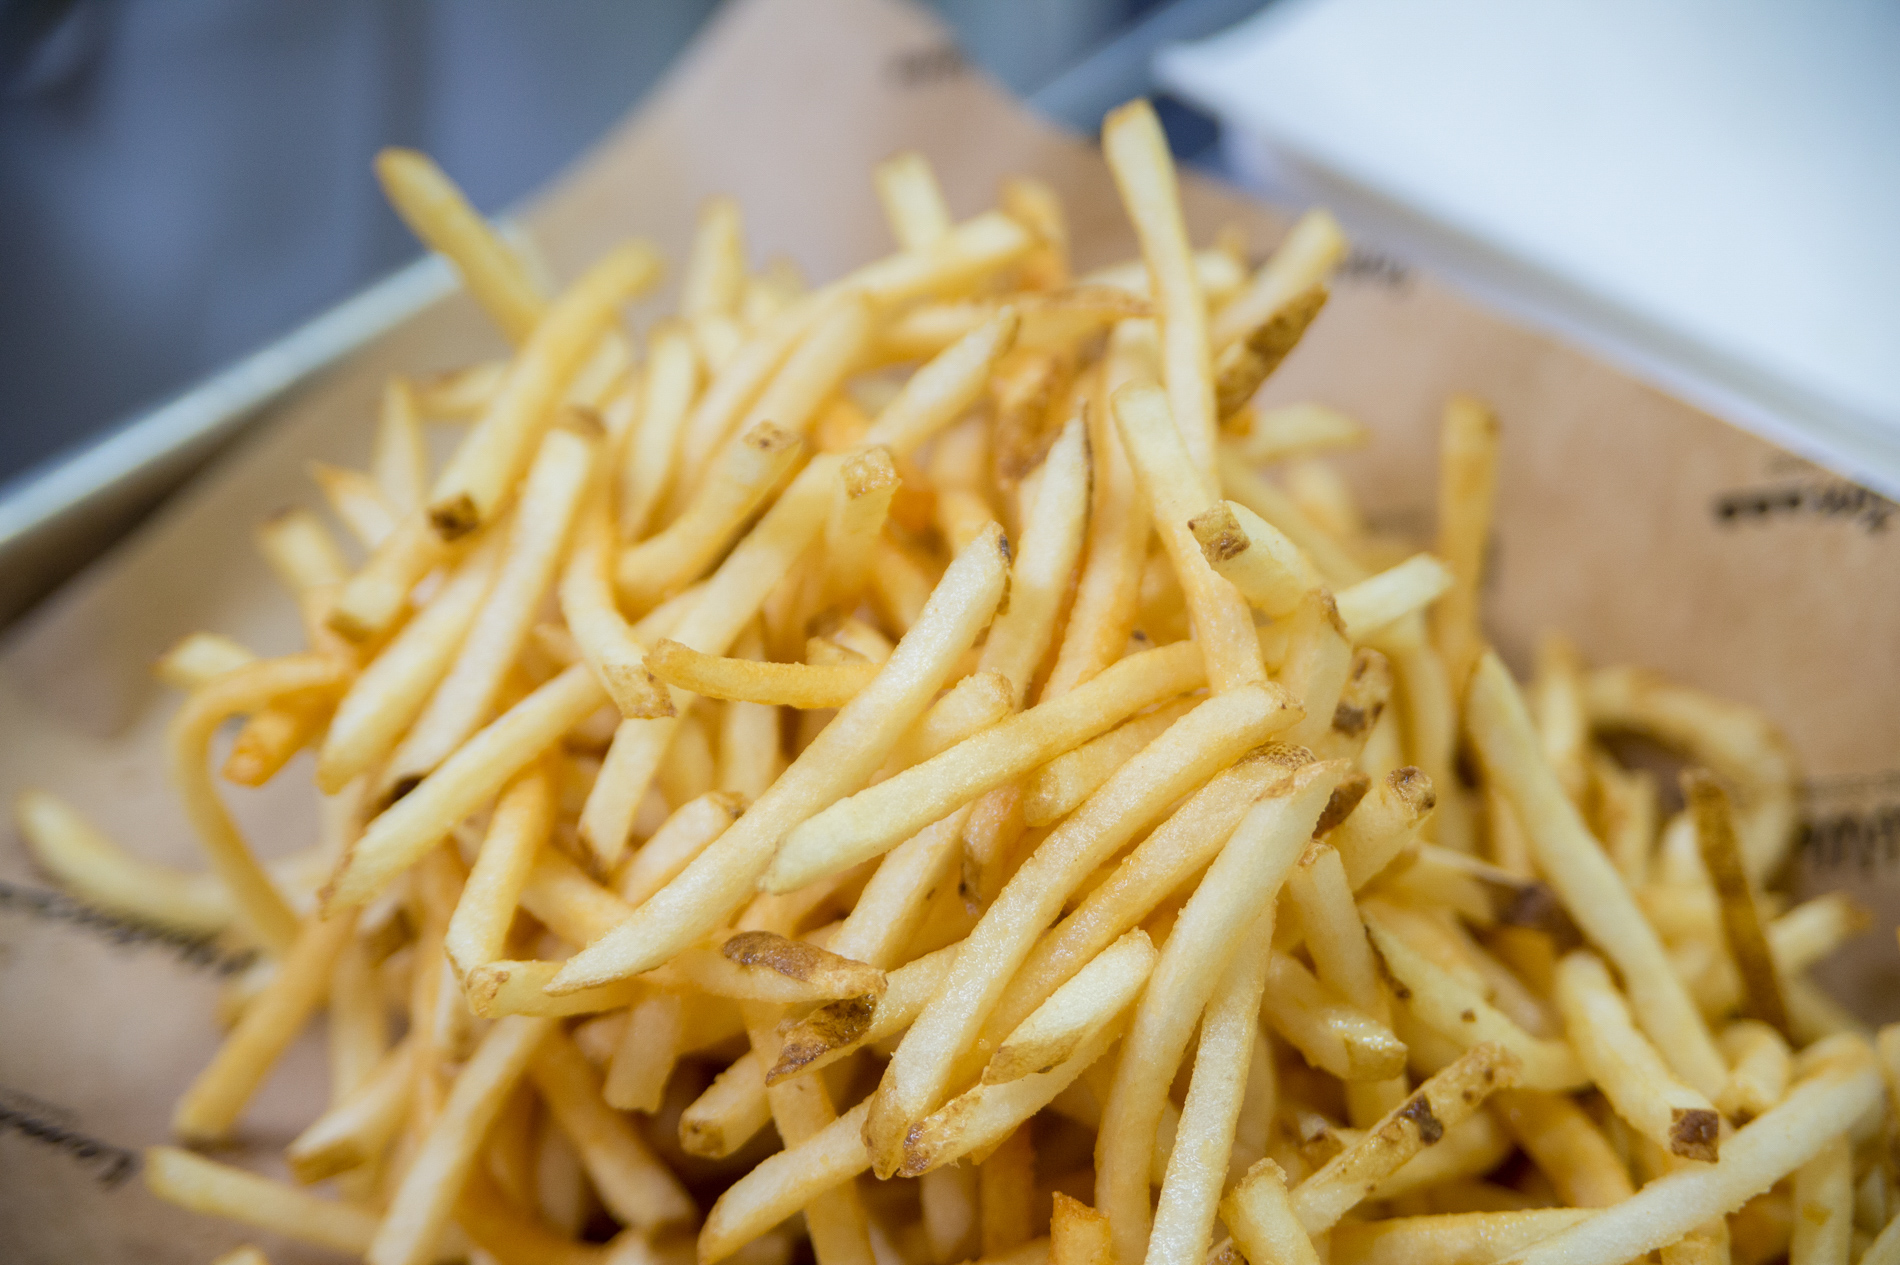 Stack of Fries